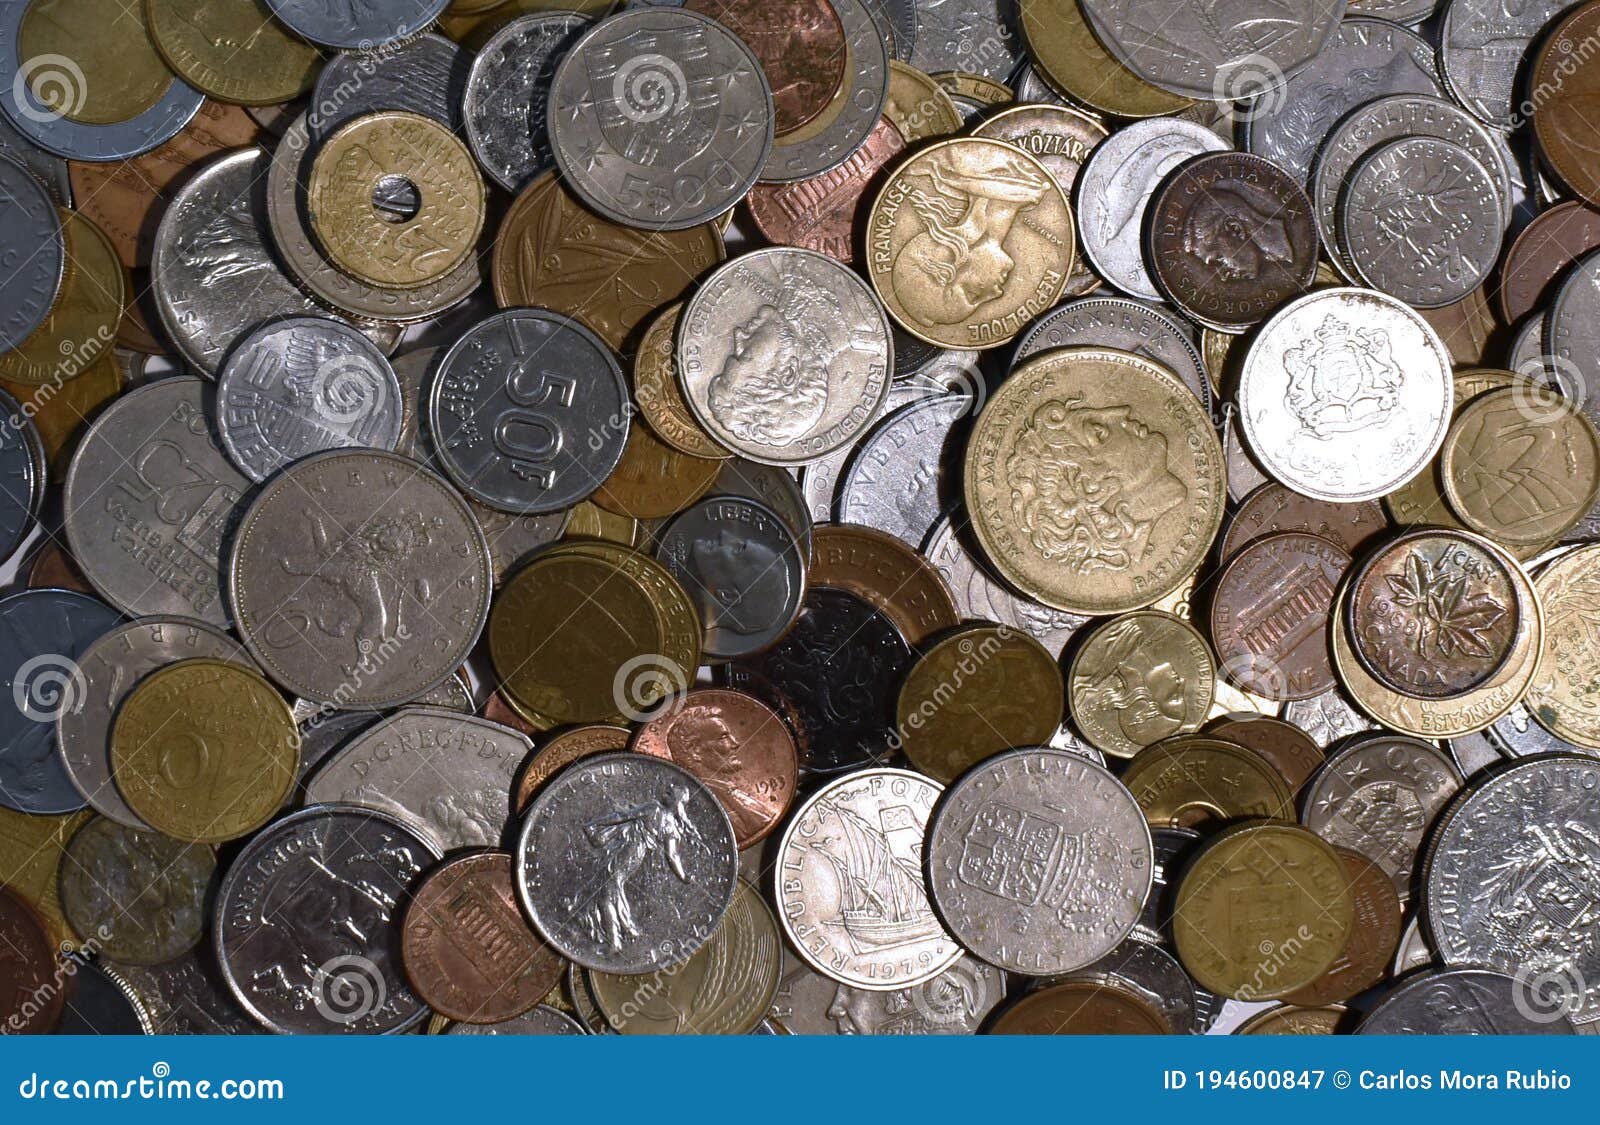 cenital view of a pile of world coins